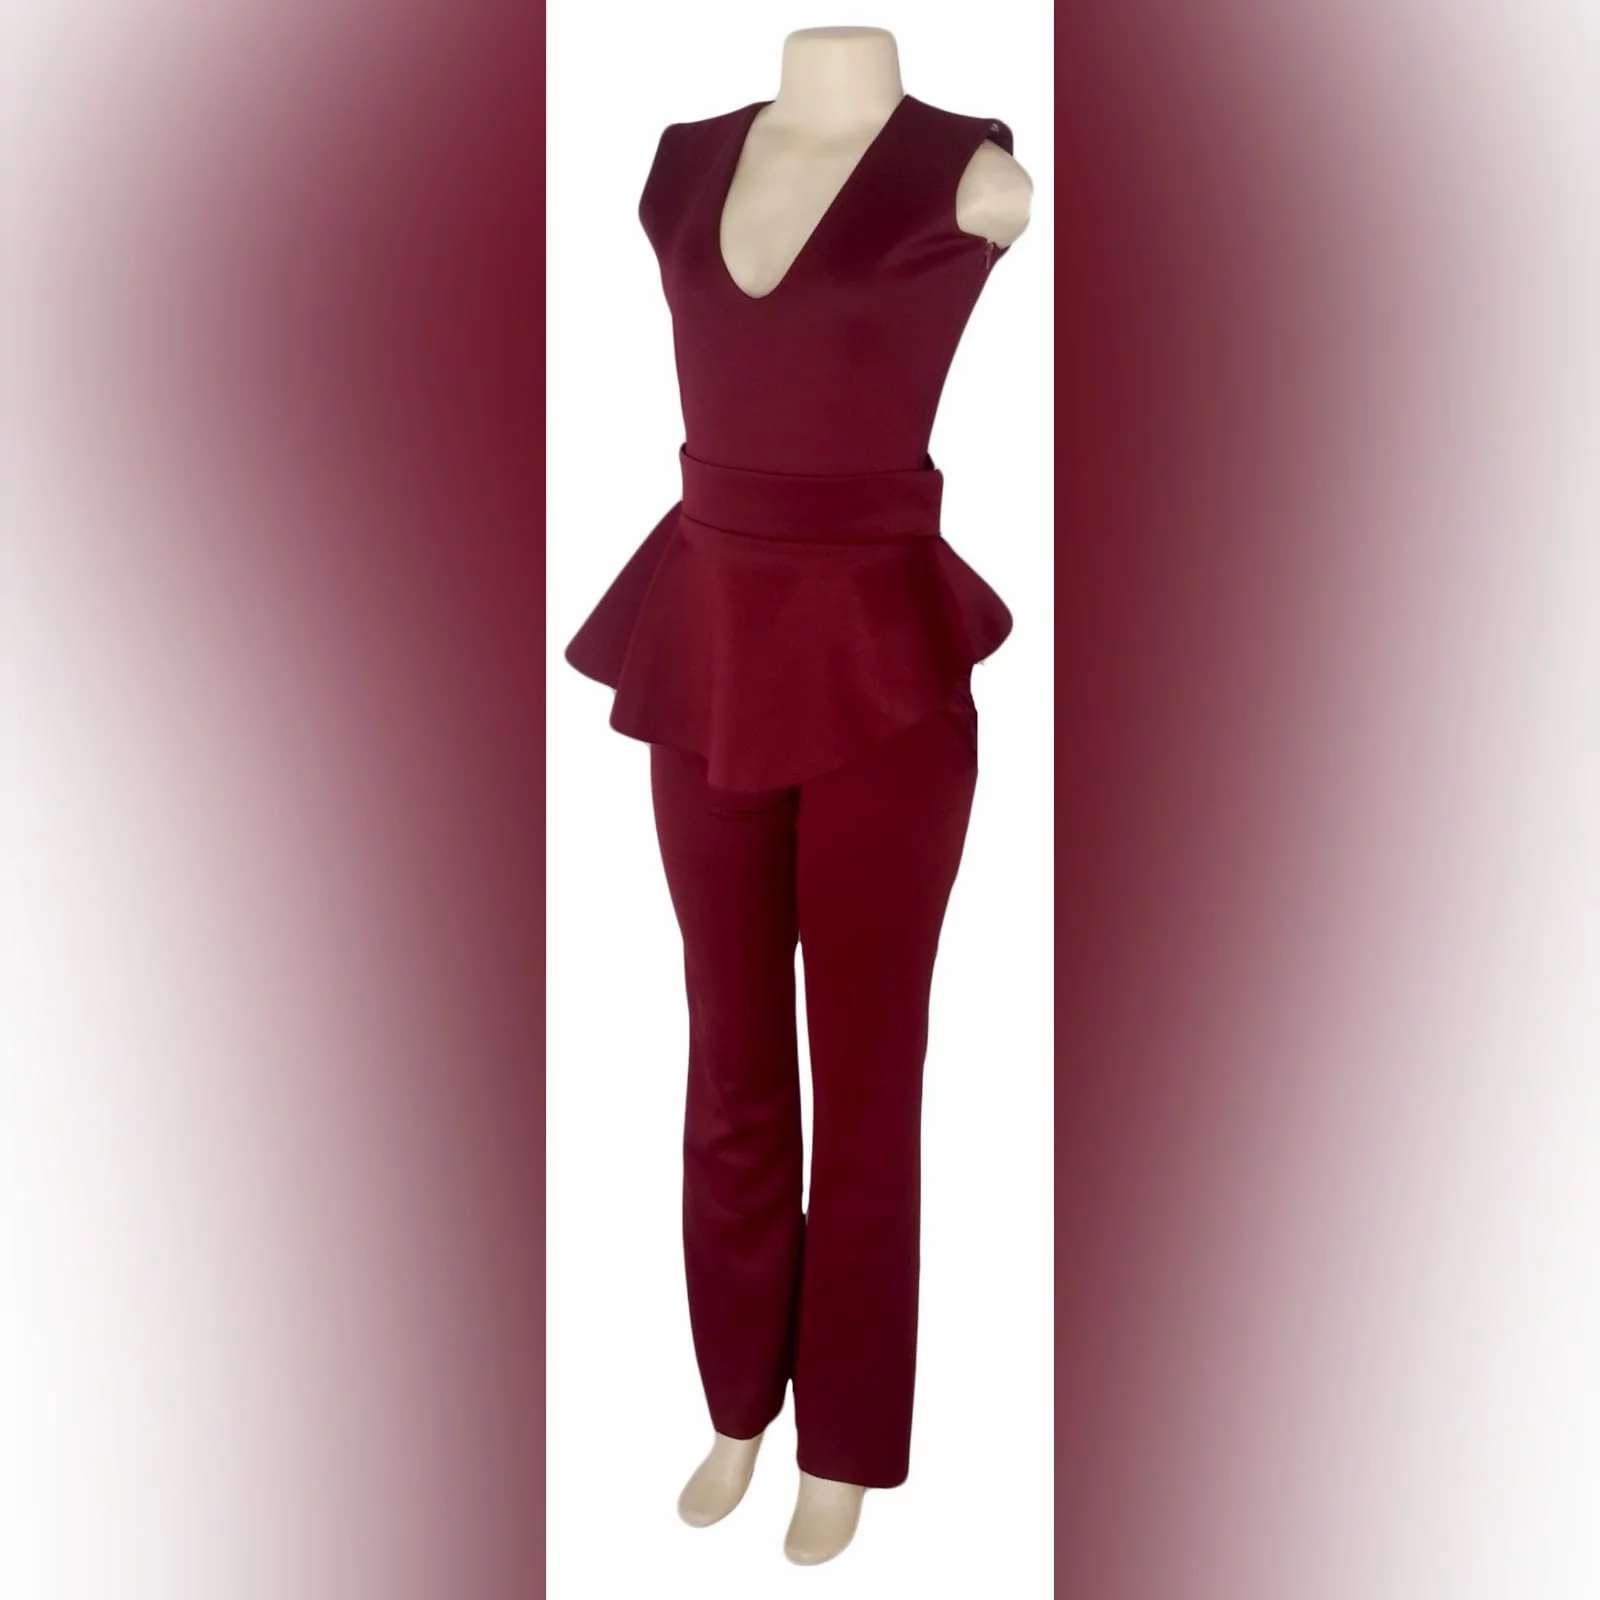 3 piece burgundy evening outfit 1 3 piece burgundy evening outfit. Bodysuit with a v neckline, with a removable peplum belt. With a removable shoulder cape